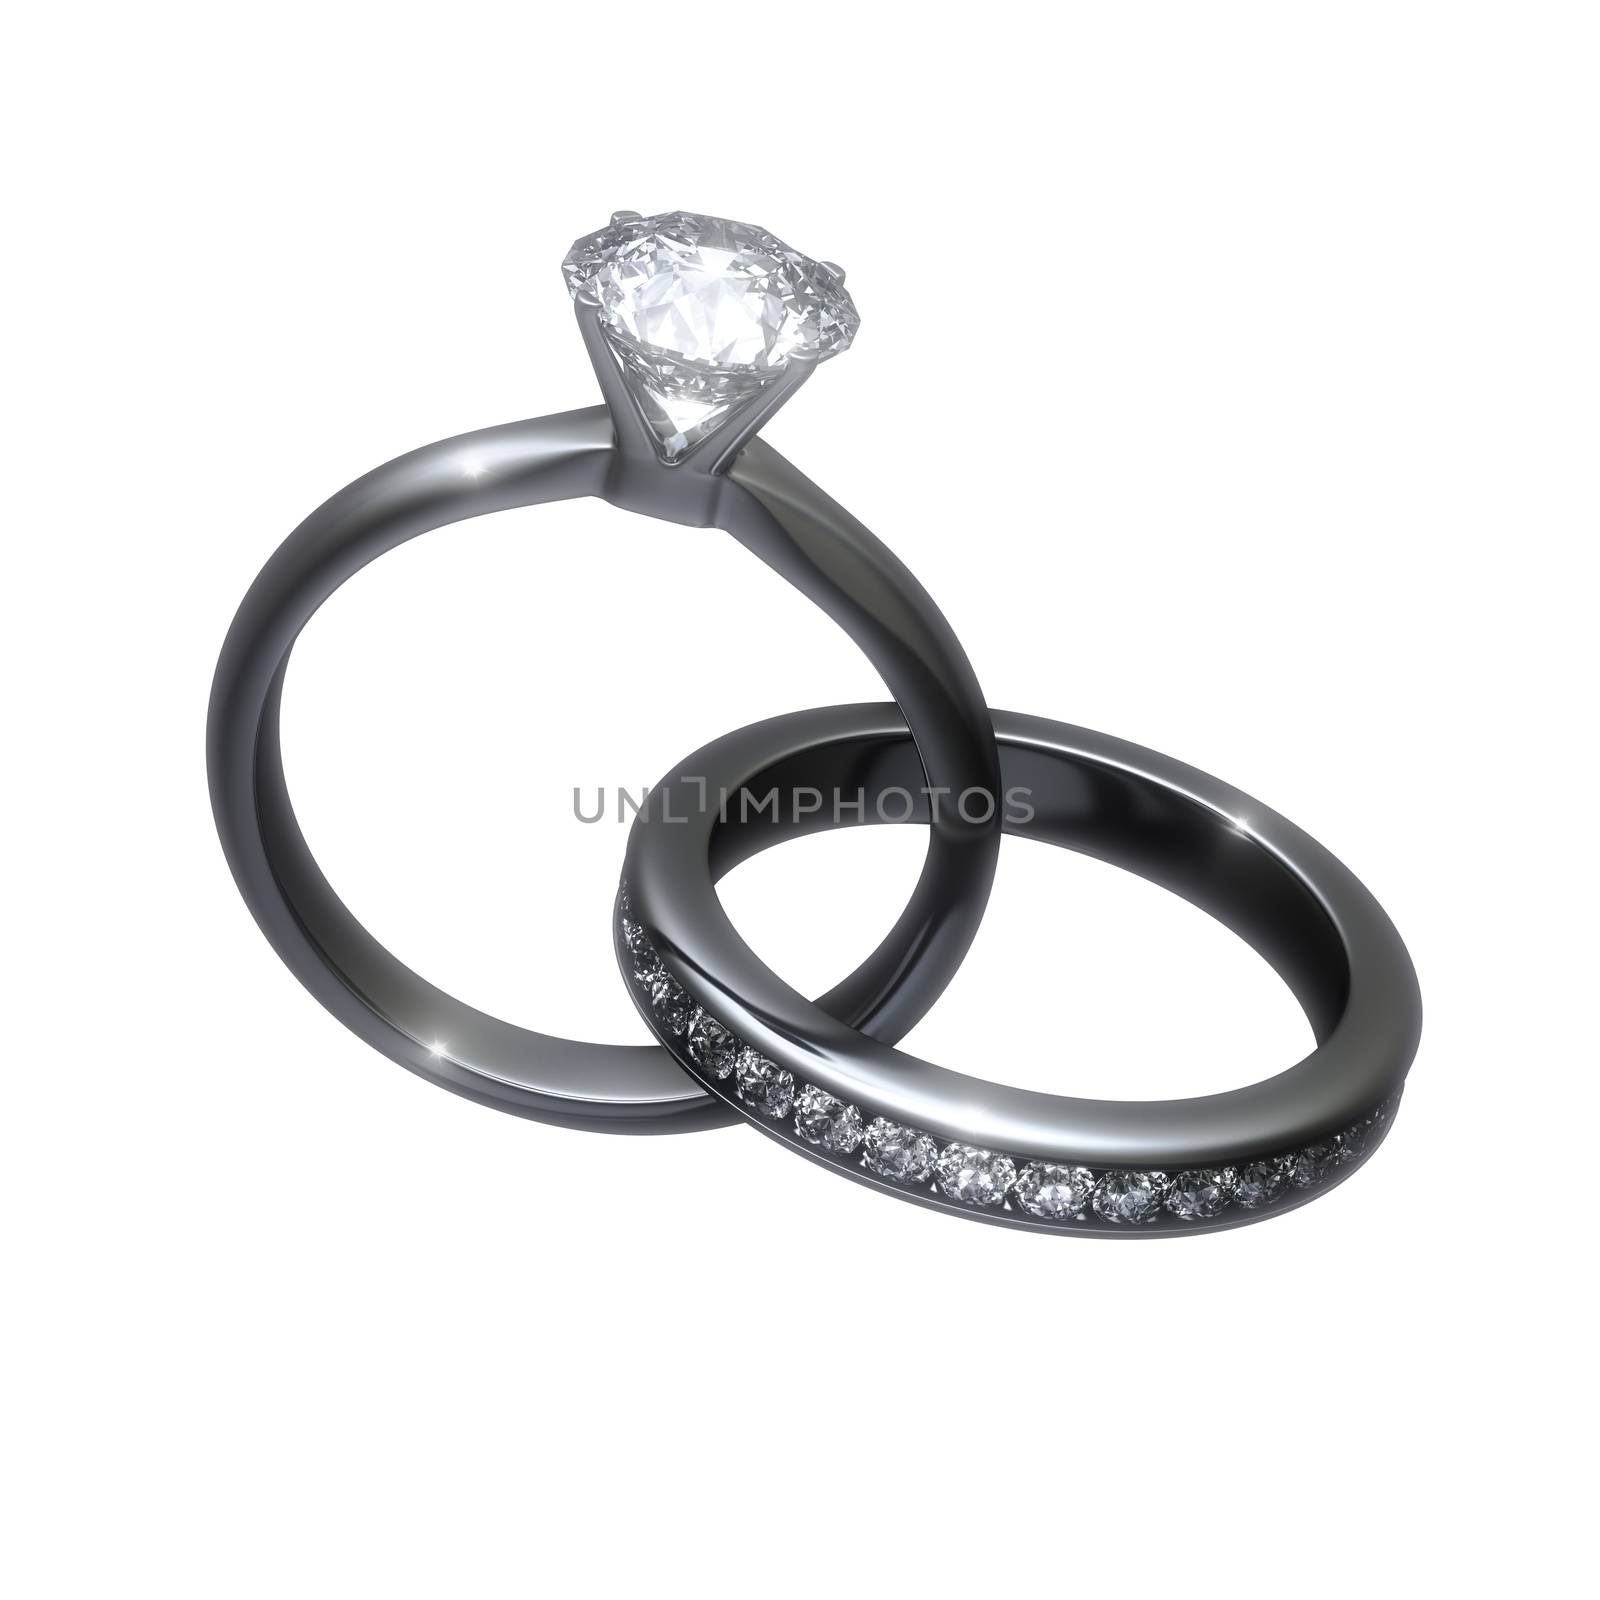 Diamond wedding rings - isolated with clipping path